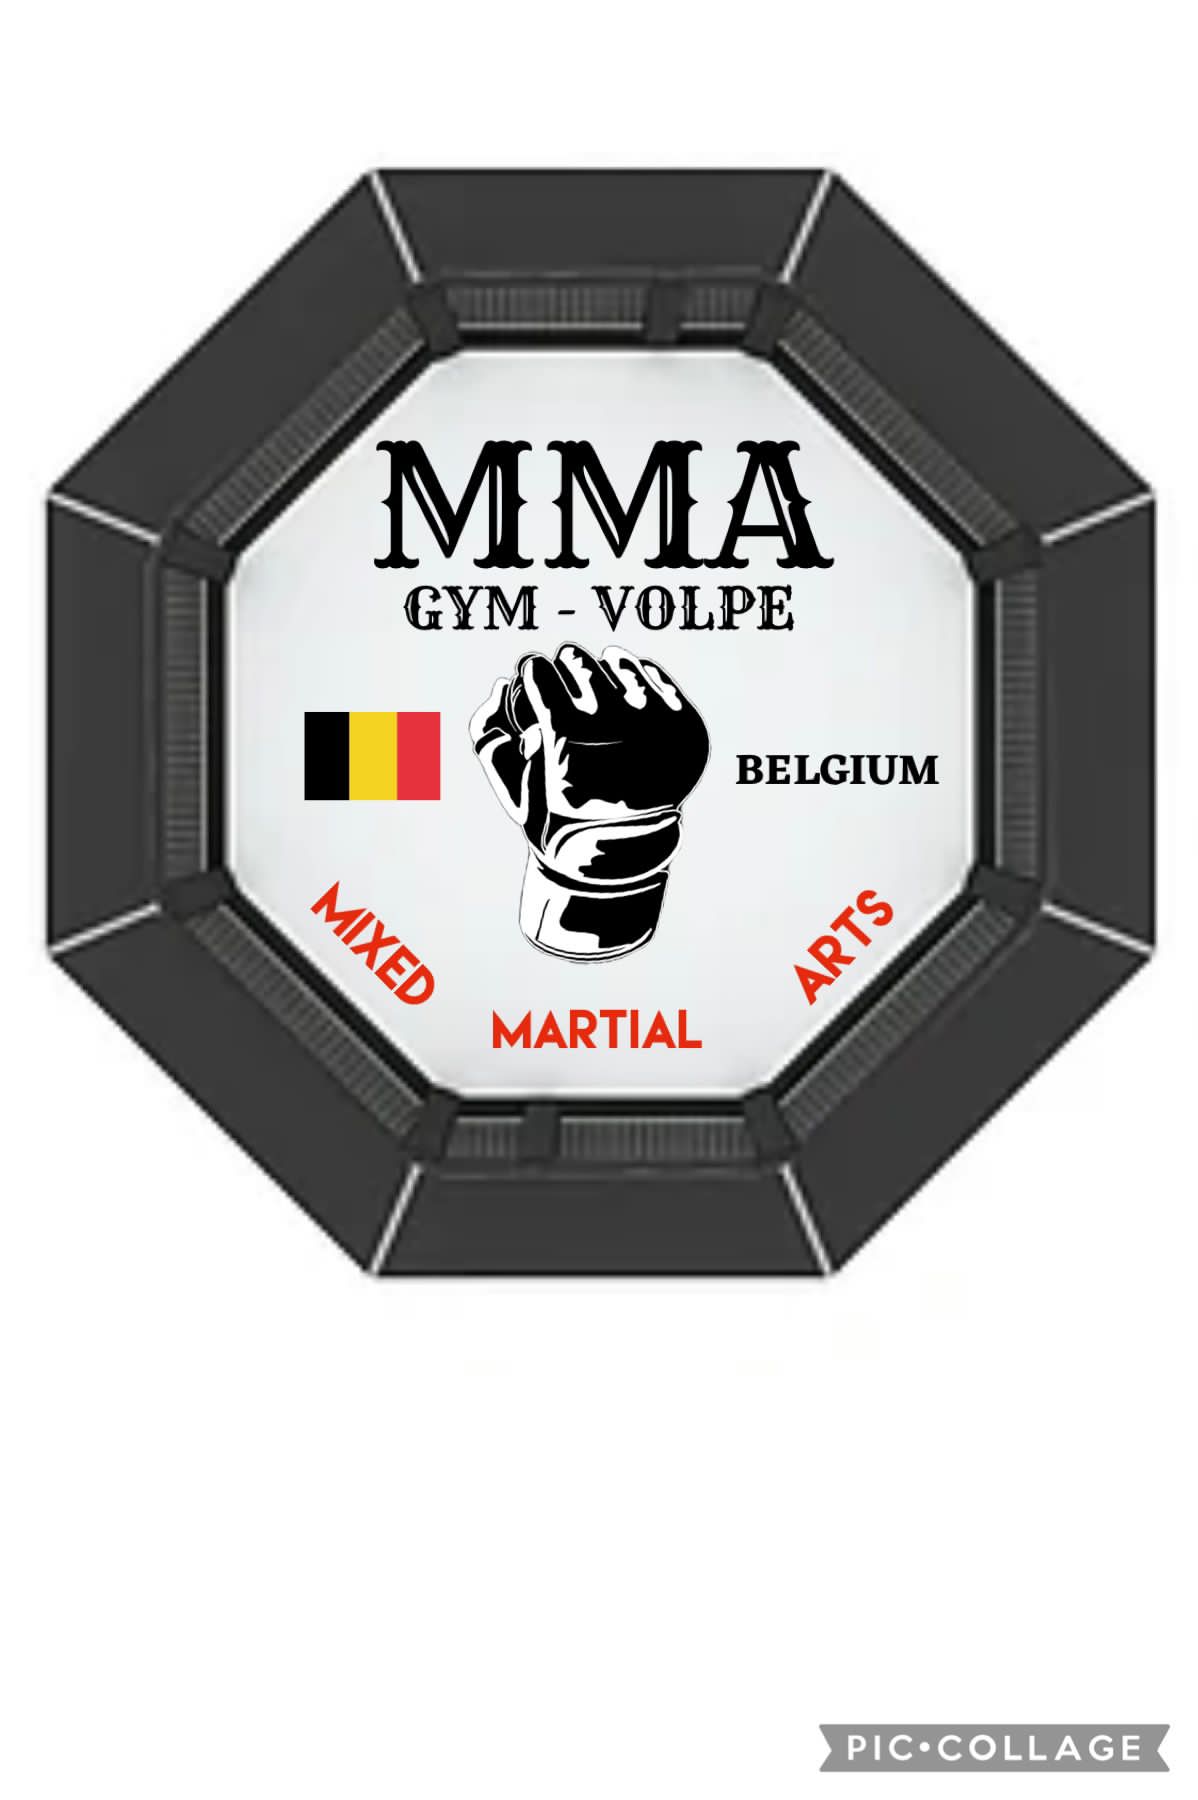 MMA GYM VOLPE